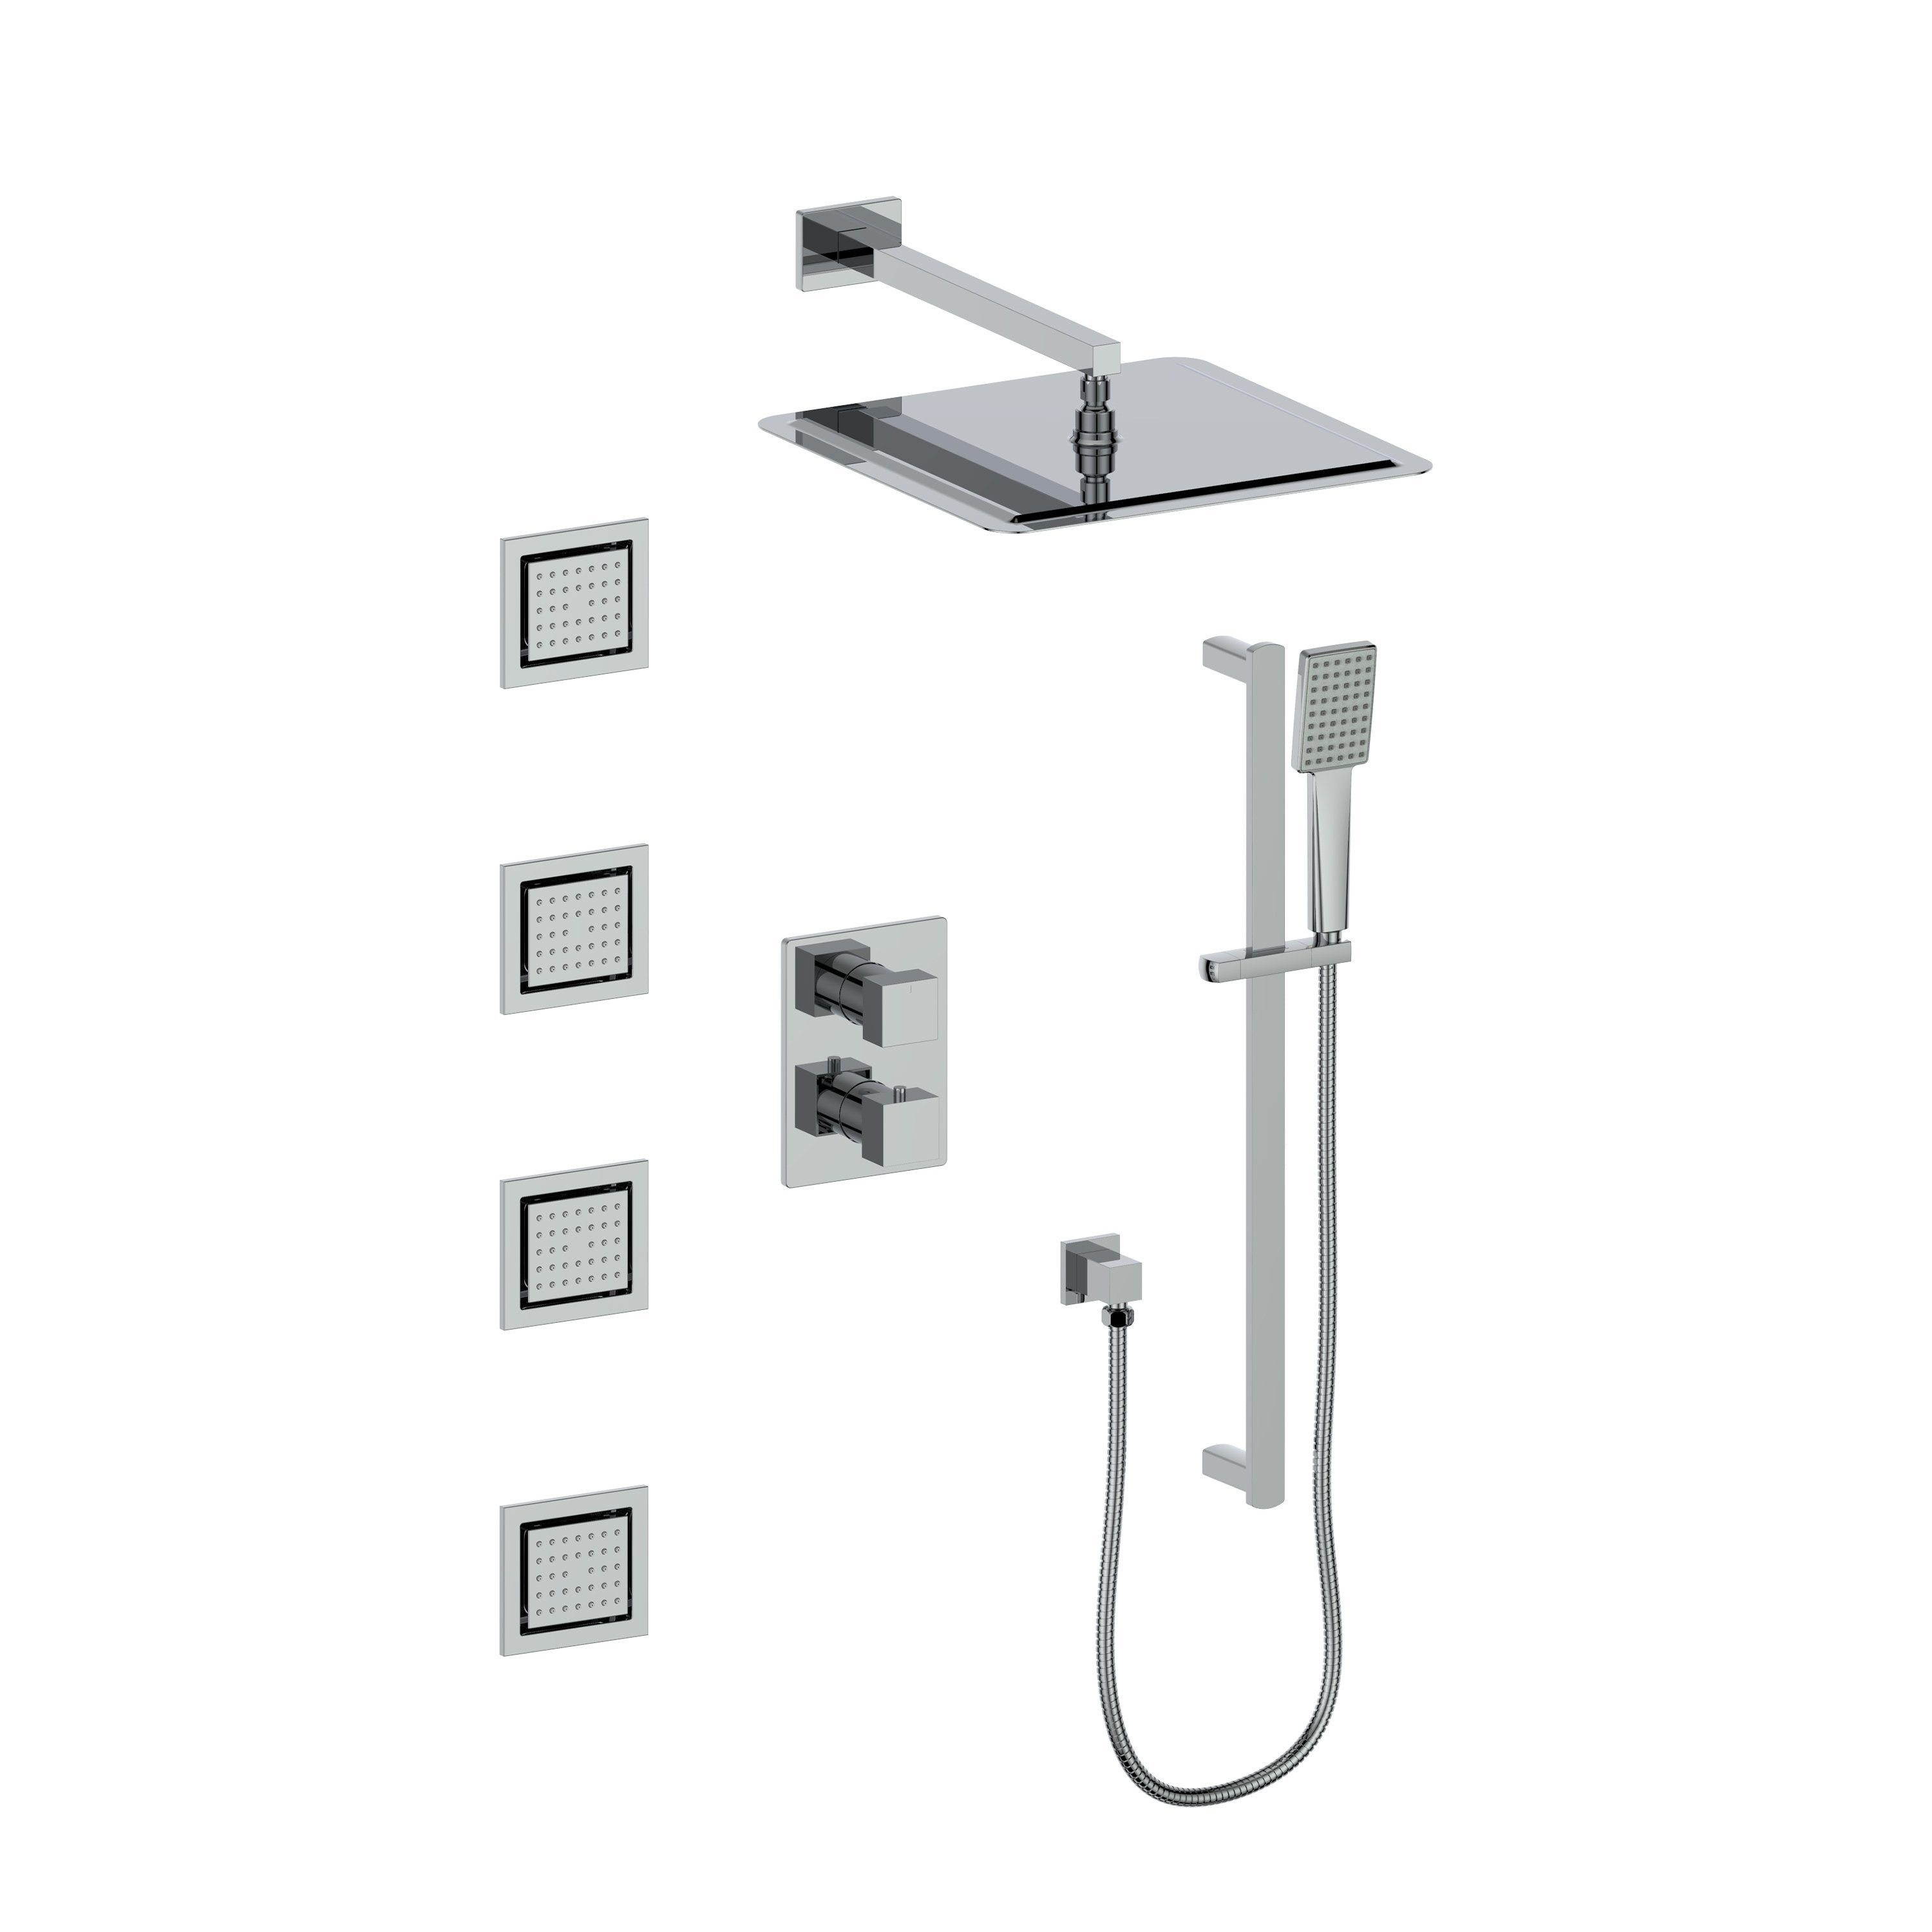 Therangehoodstore.com, ZLINE Crystal Bay Thermostatic Shower System with Body Jets, color options available (CBY-SHS-T3), CBY-SHS-T3-CH,